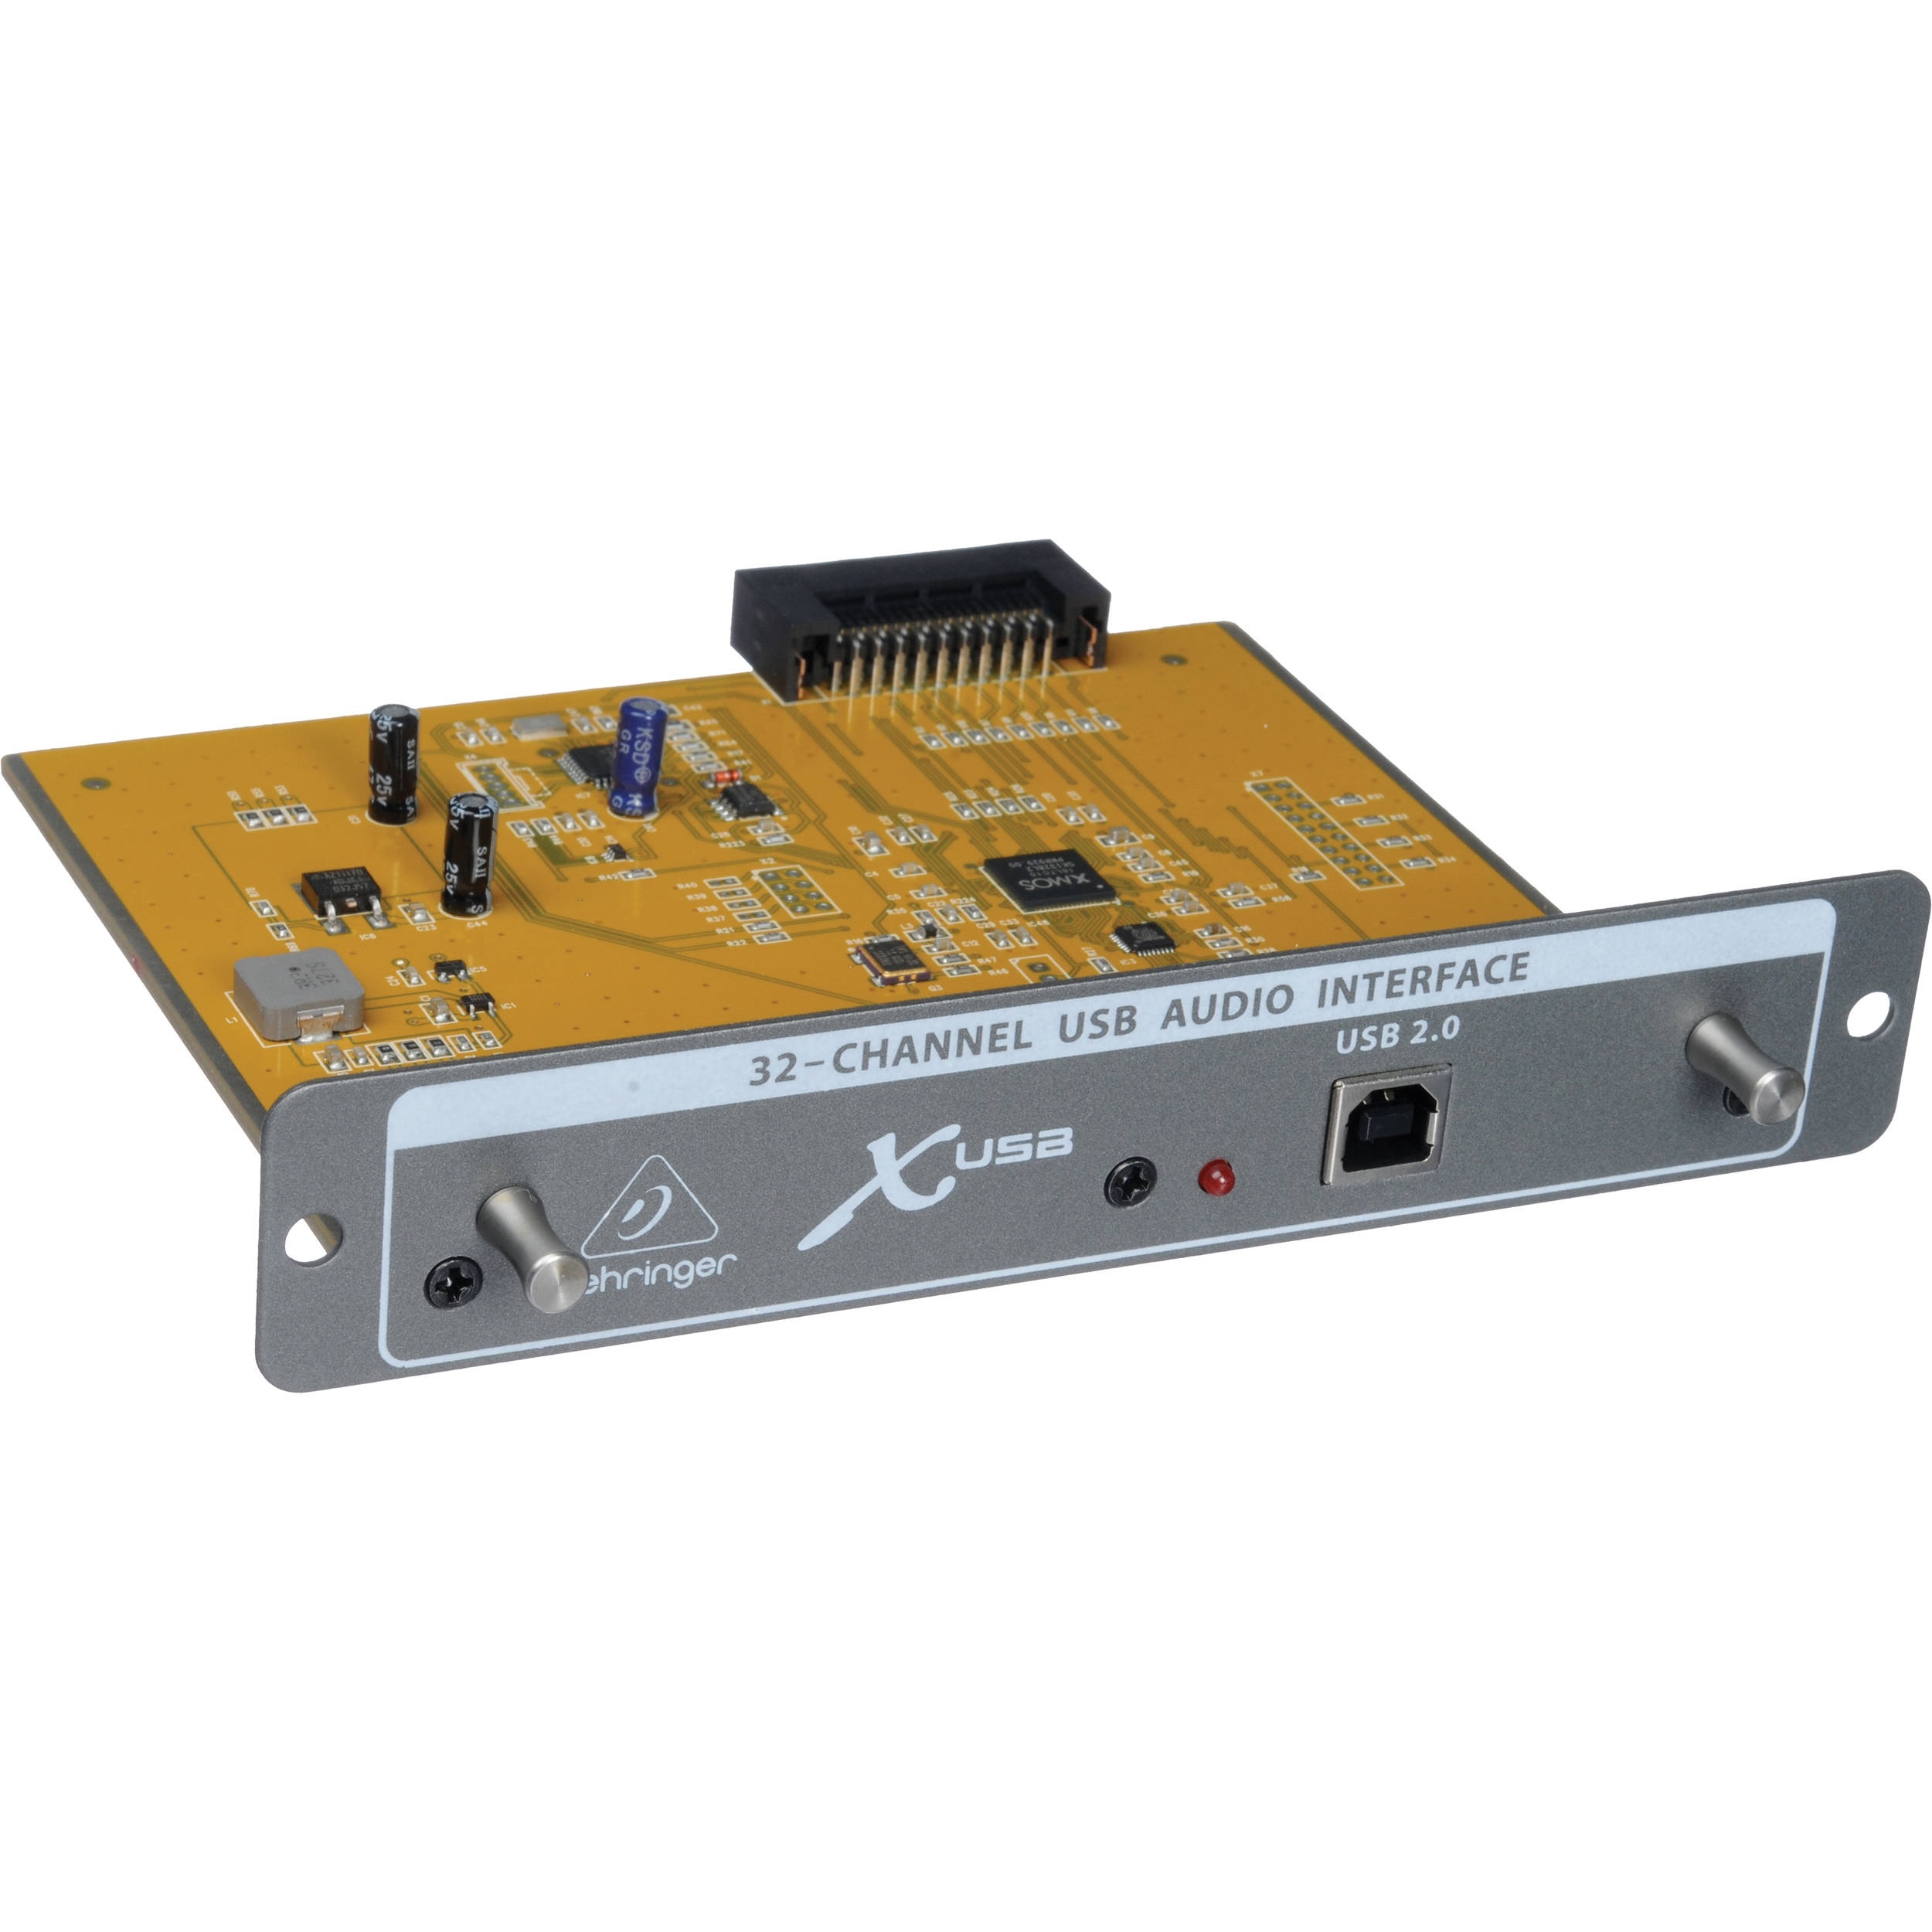 Behringer X-USB 32-Channel USB 2.0 Audio Interface Expansion Card For X32 Mixer